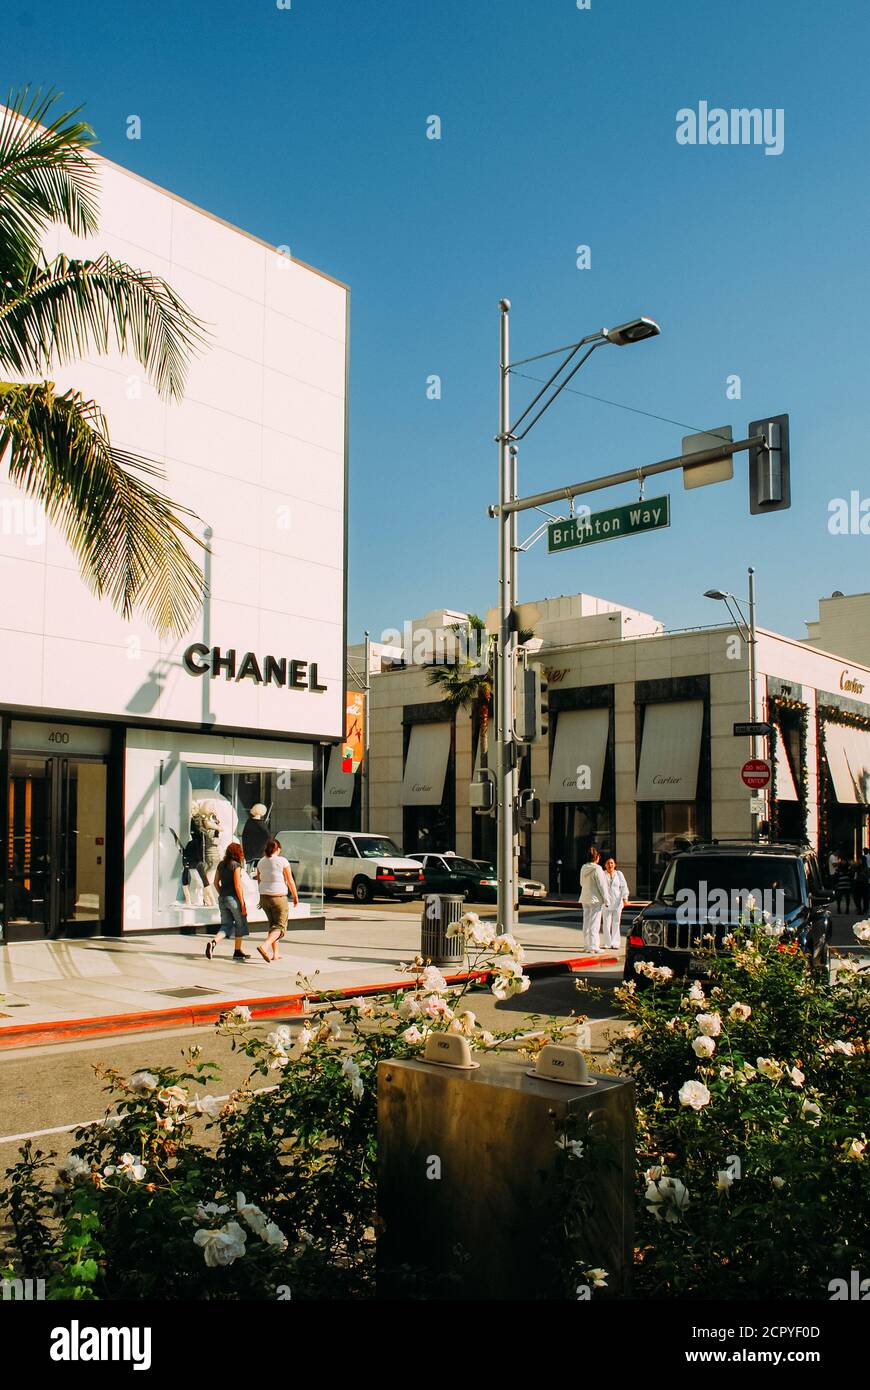 Photos: Chanel's Revamped South Coast Plaza Store Goes Under the